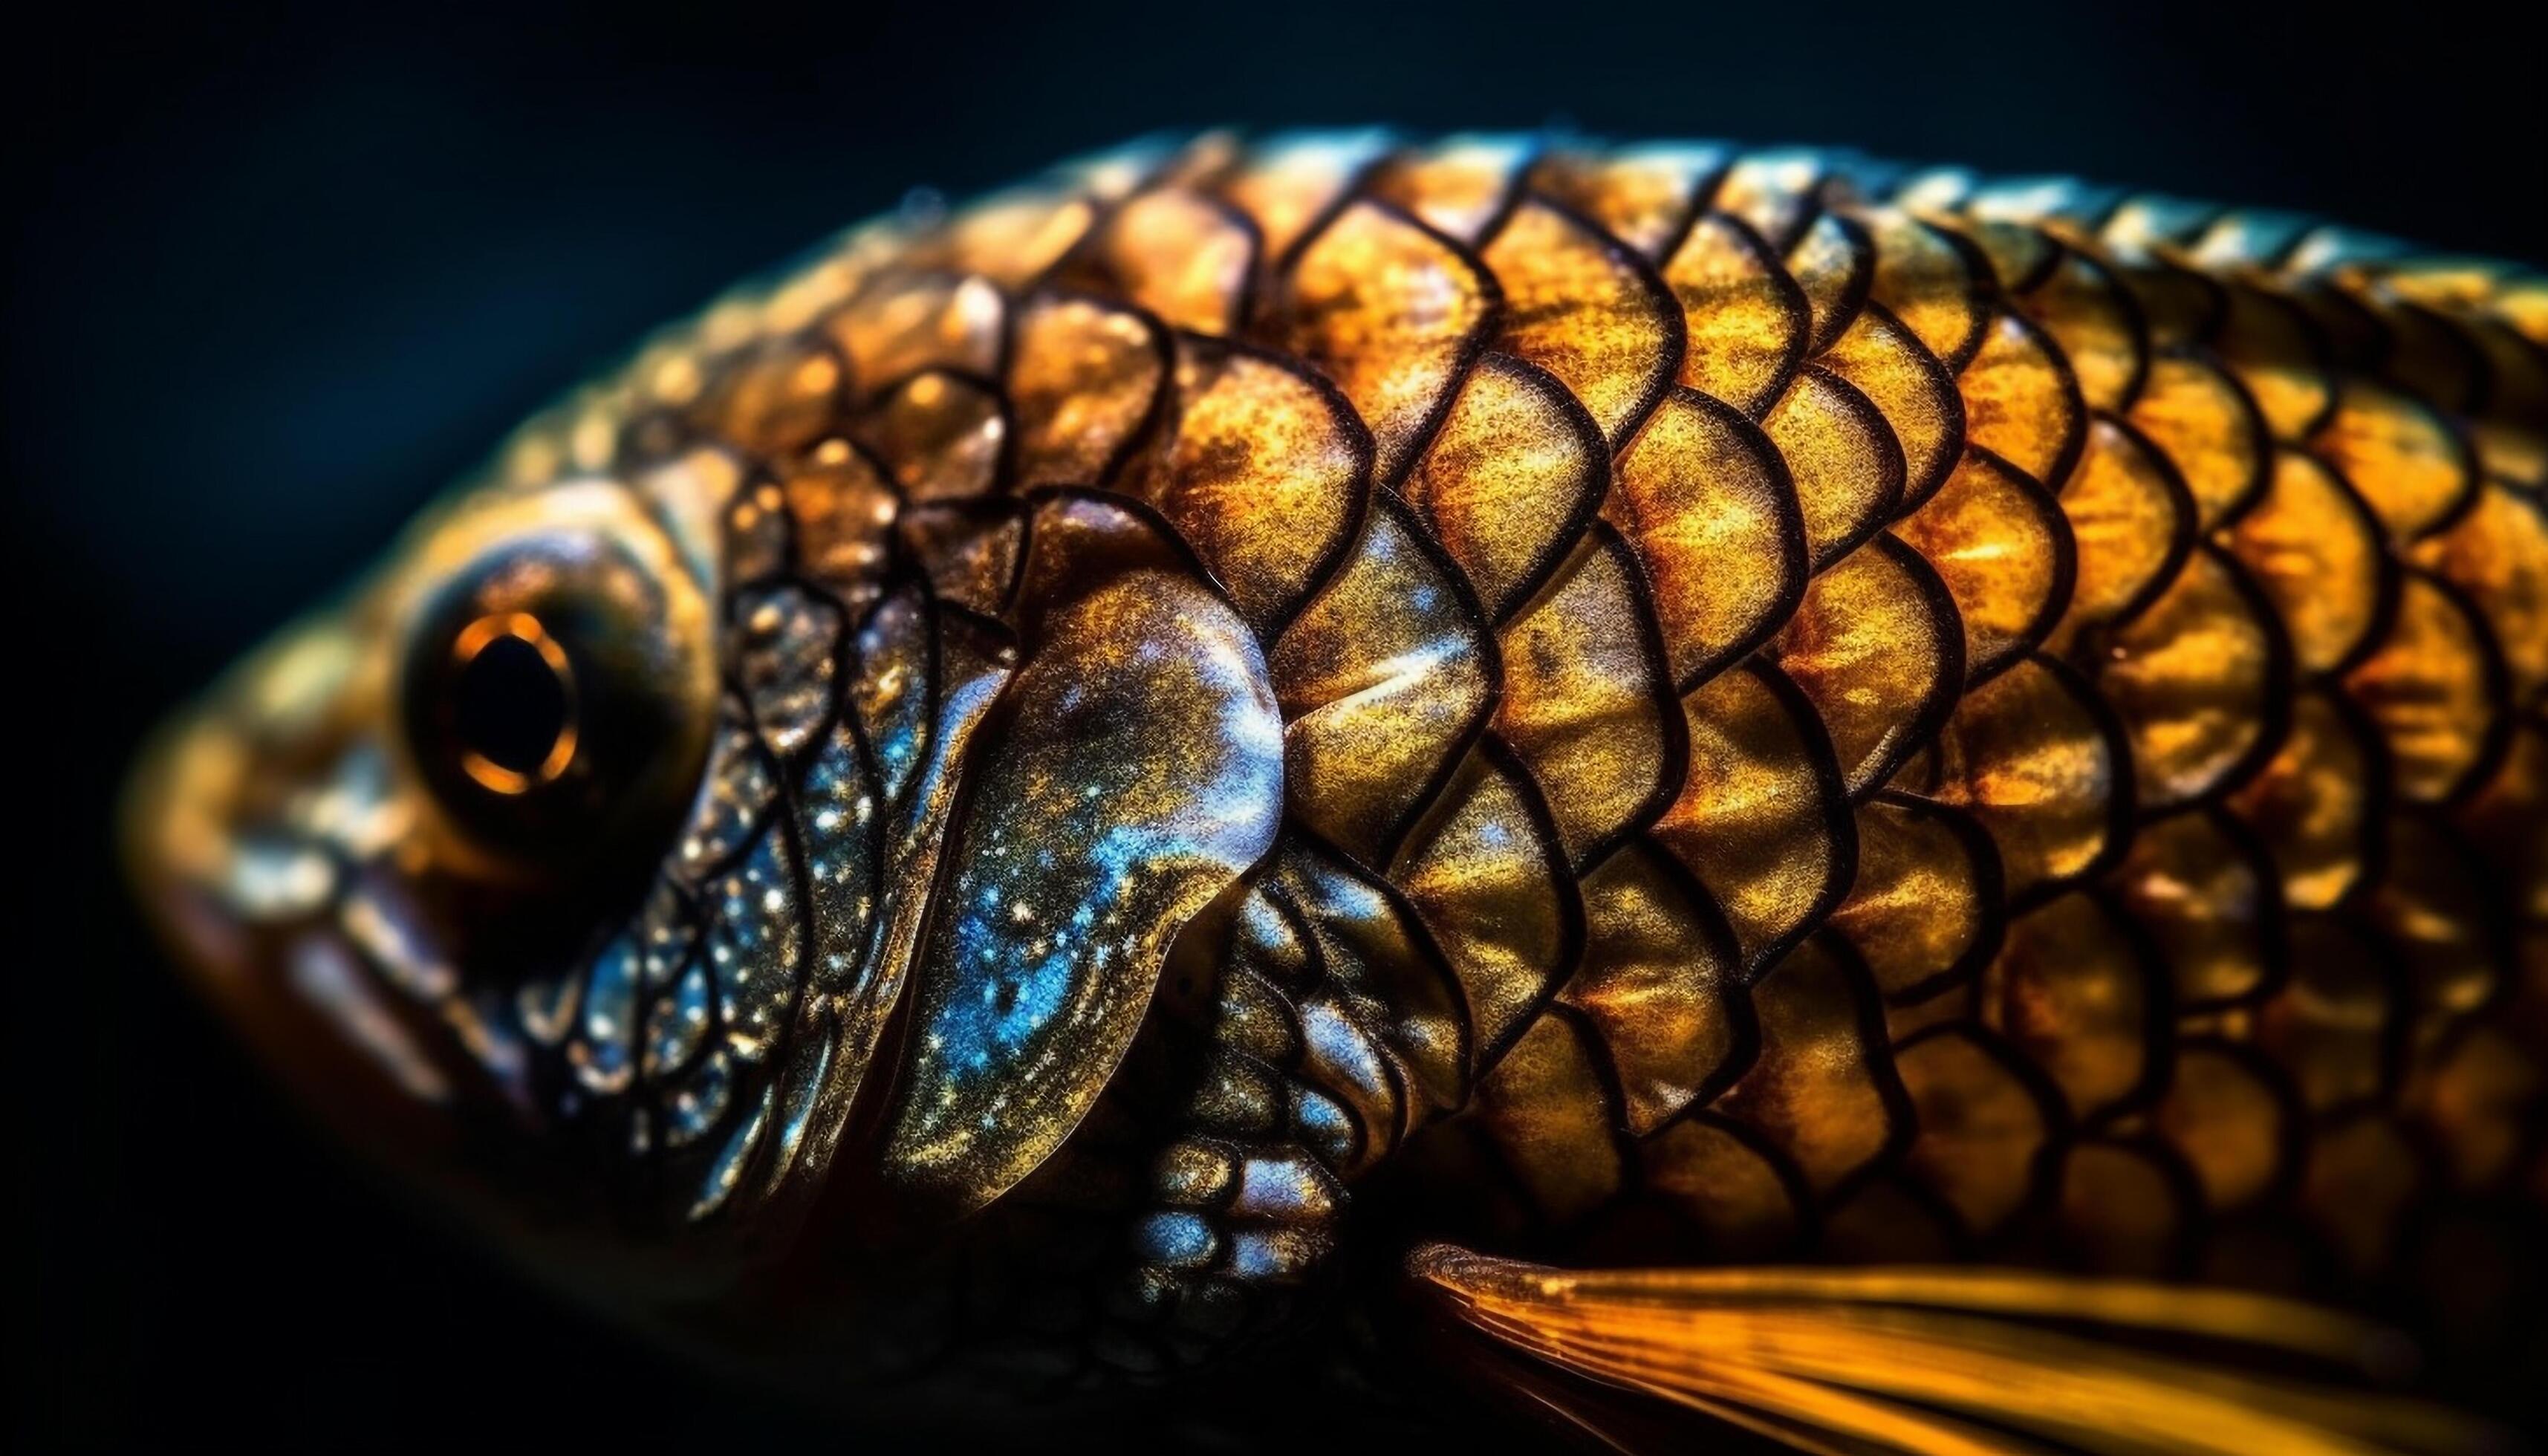 Golden dragon fish scales shimmer in underwater beauty of nature